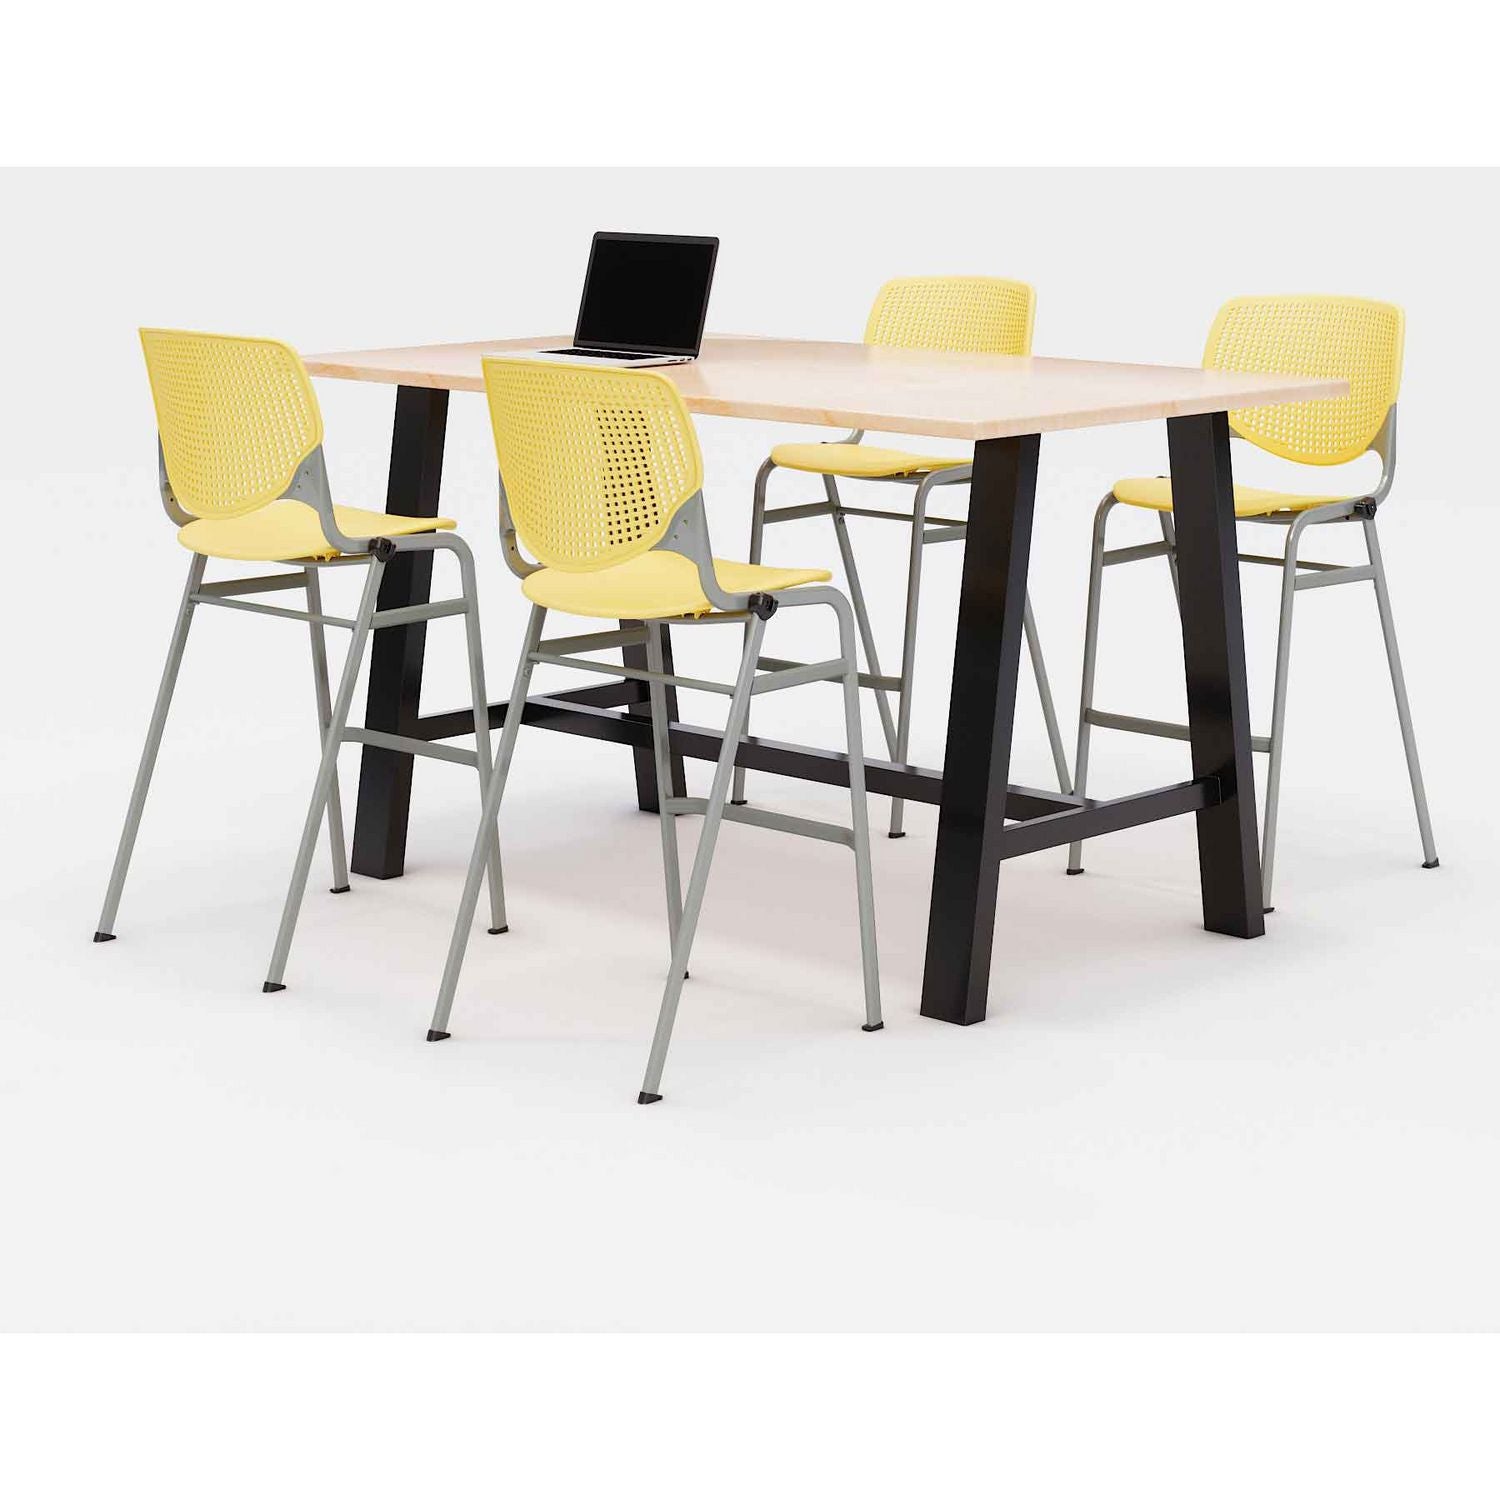 midtown-bistro-dining-table-with-four-yellow-kool-barstools-36-x-72-x-41-kensington-maple-ships-in-4-6-business-days_kfi840031900777 - 1